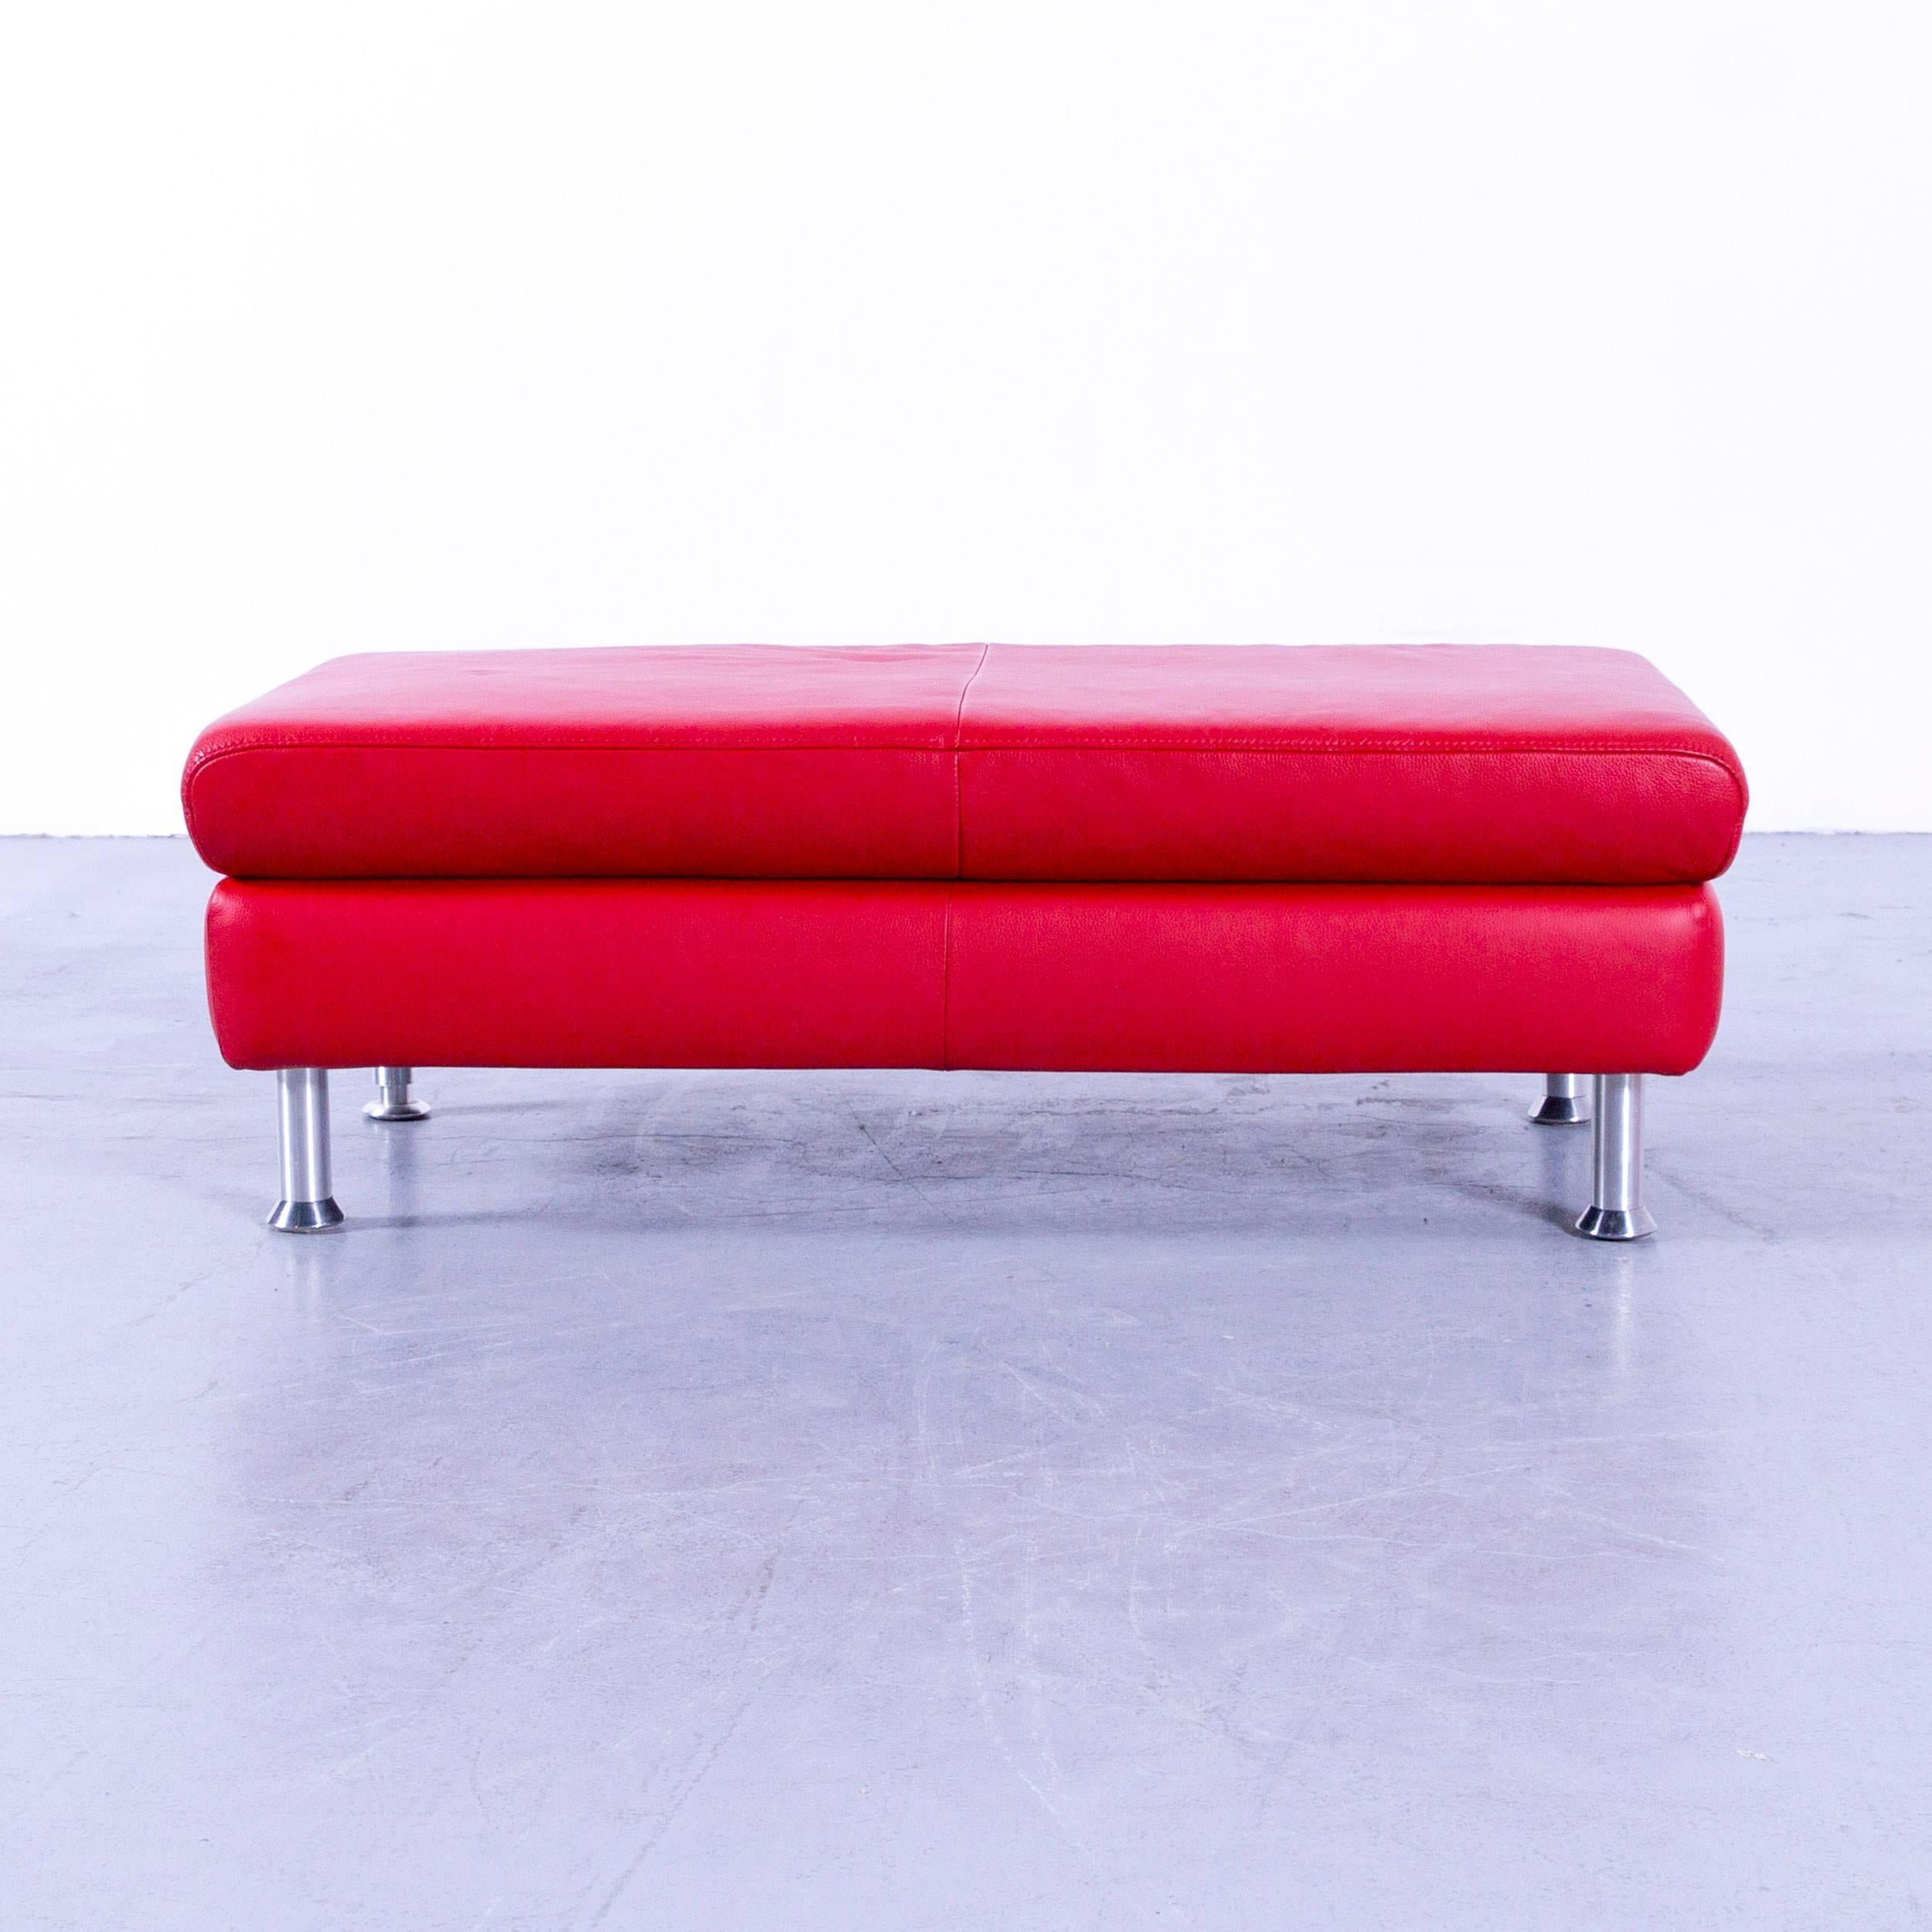 Willi Schillig designer leather foot stool red pouff modern couch.